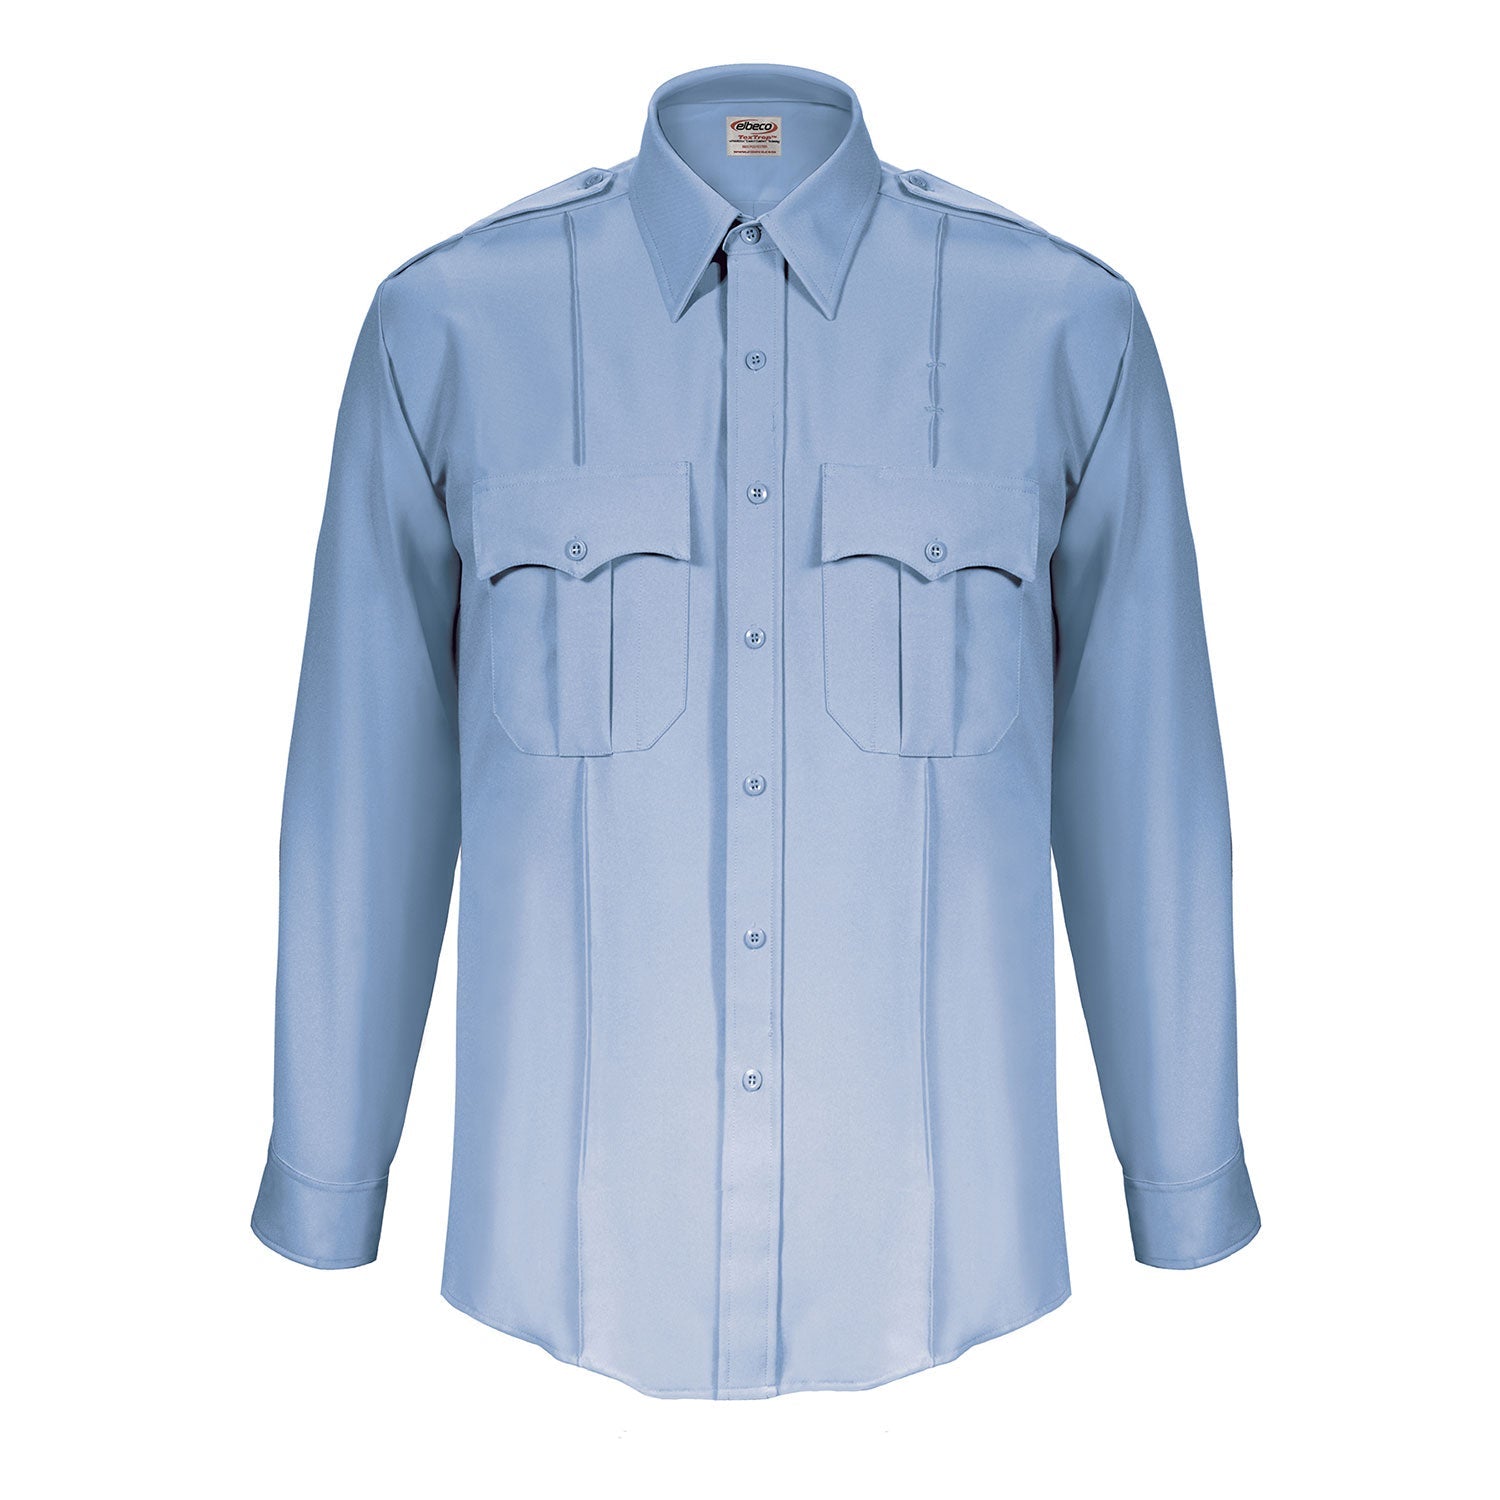 the Firemen Police Public Safety | TexTrop2 Long Sleeve Men's Uniform Shirt | French Blue Moisture Wicking Police Duty Shirt has a generous fit and pleats down the front and back